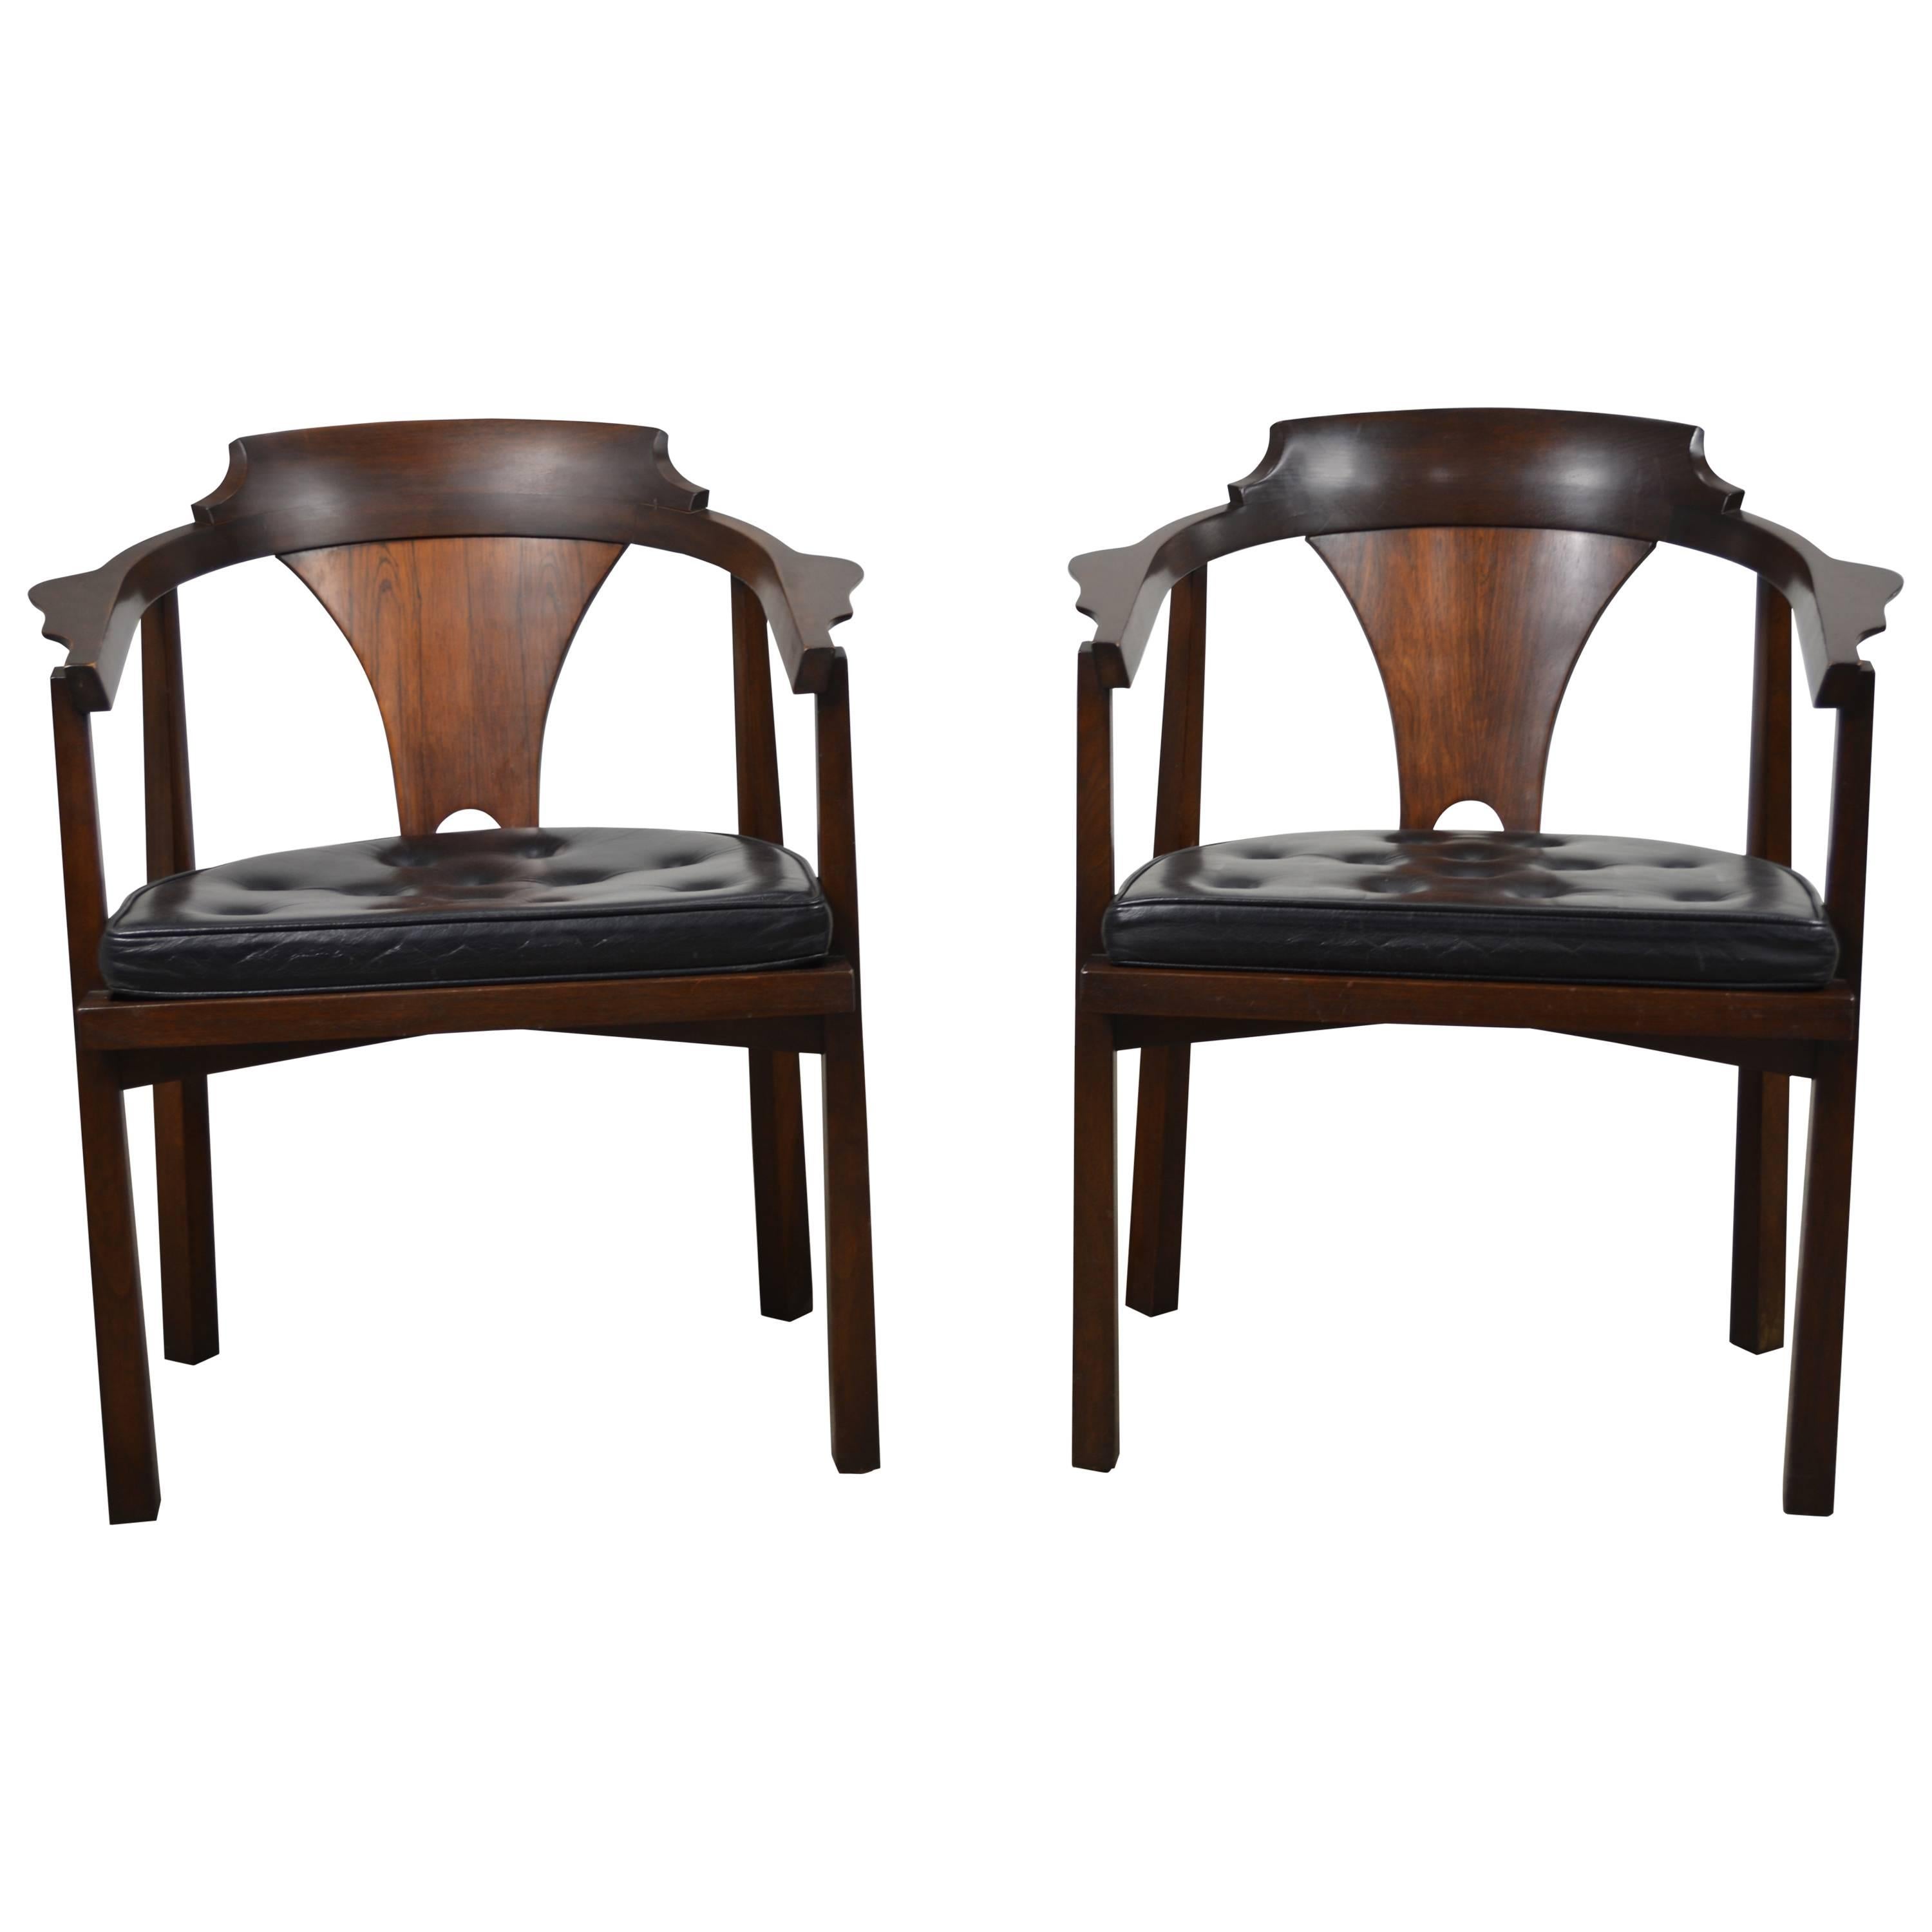 Edward Wormley Pair of Horseshoe Chairs for Dunbar